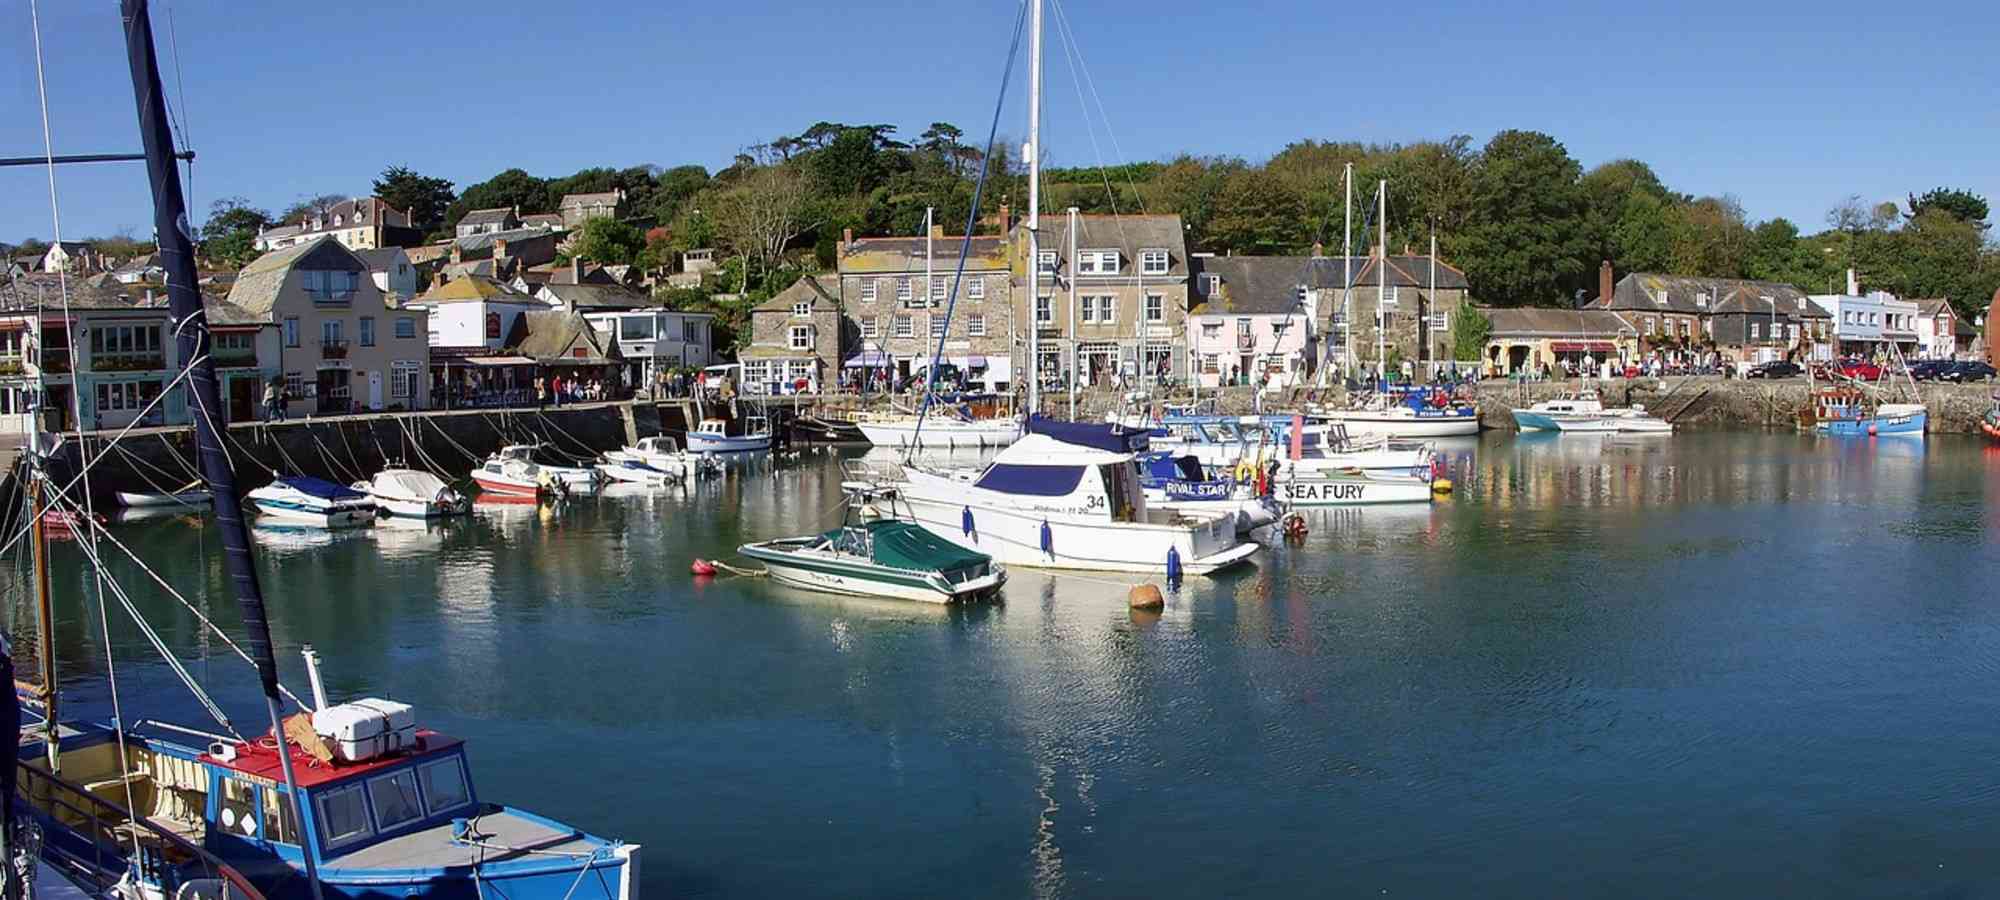 luxury holiday cottage padstow